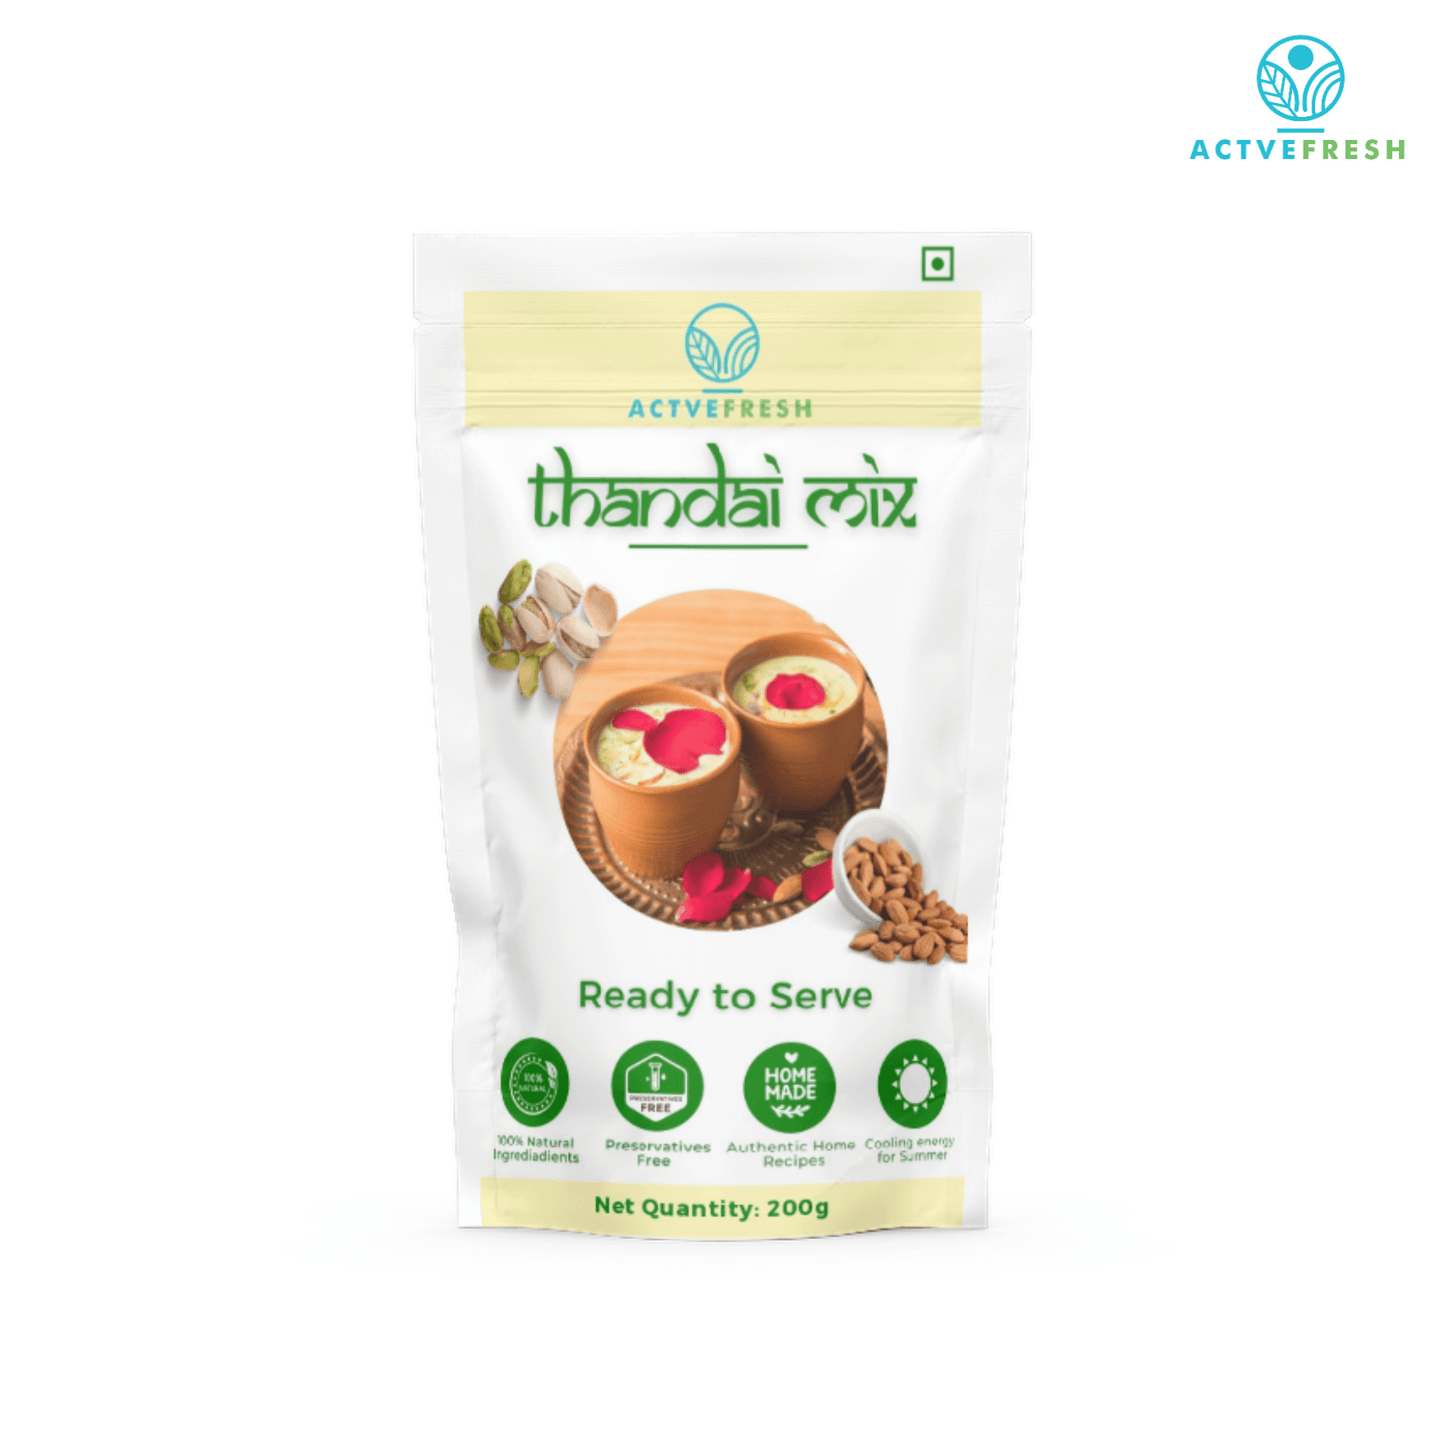 Actvefrsh Thandai Mix 200g - A Refreshing Blend of Exquisite Flavors